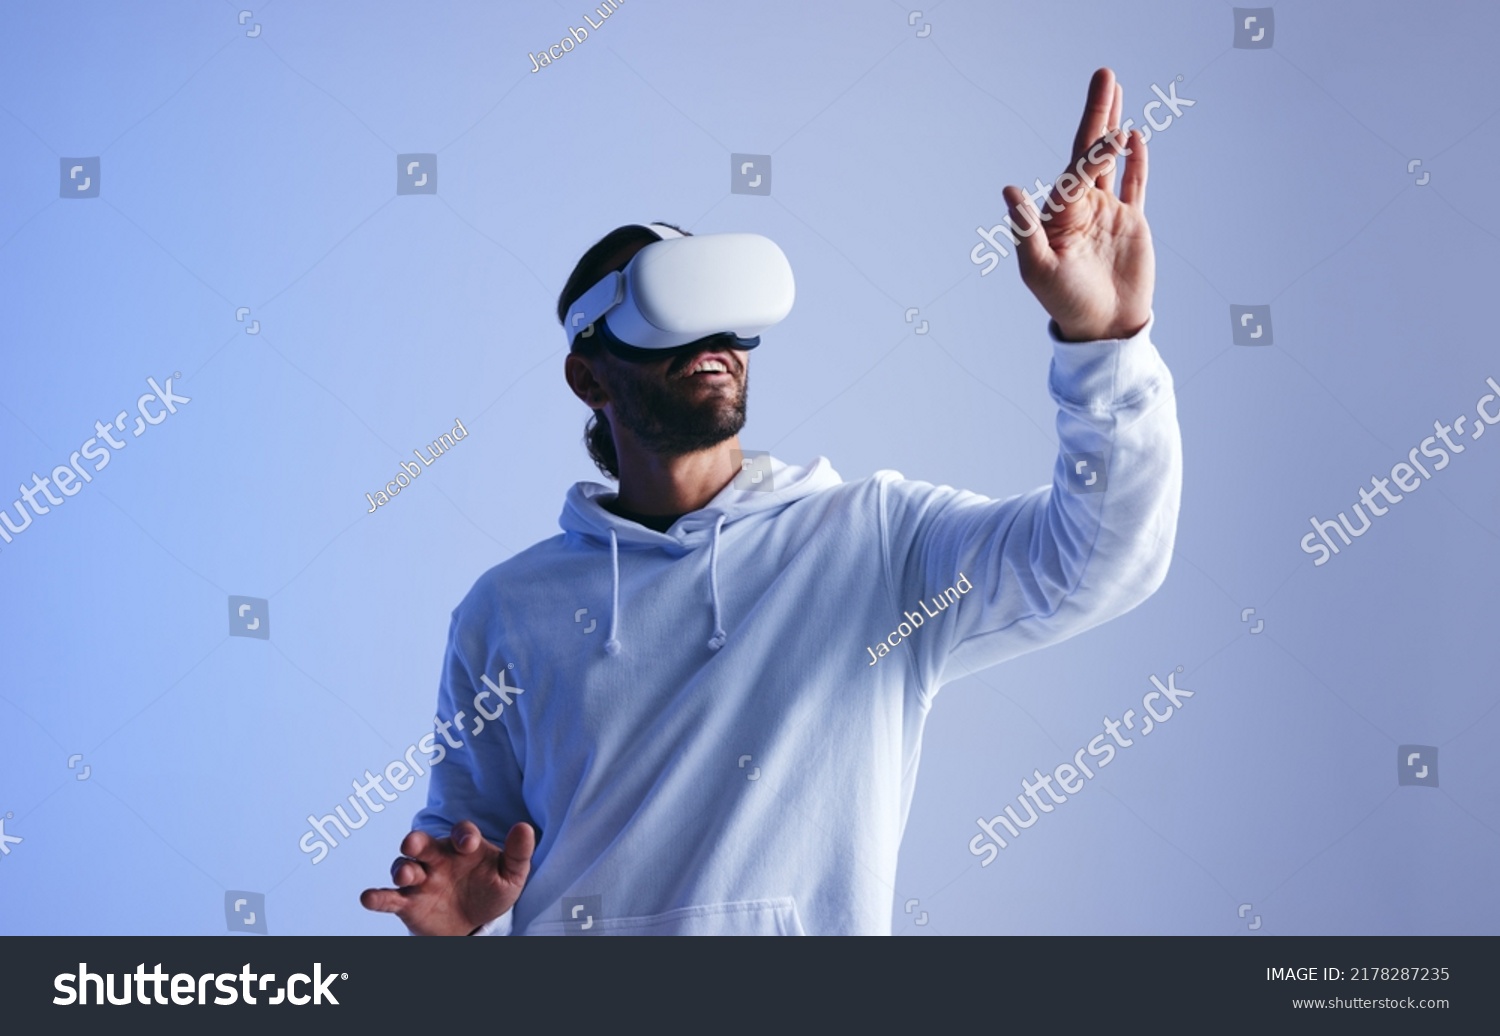 Happy young man touching virtual space with his hand. Cheerful young man experiencing a fun 3D simulation. Young man interacting with the metaverse using virtual reality goggles. #2178287235